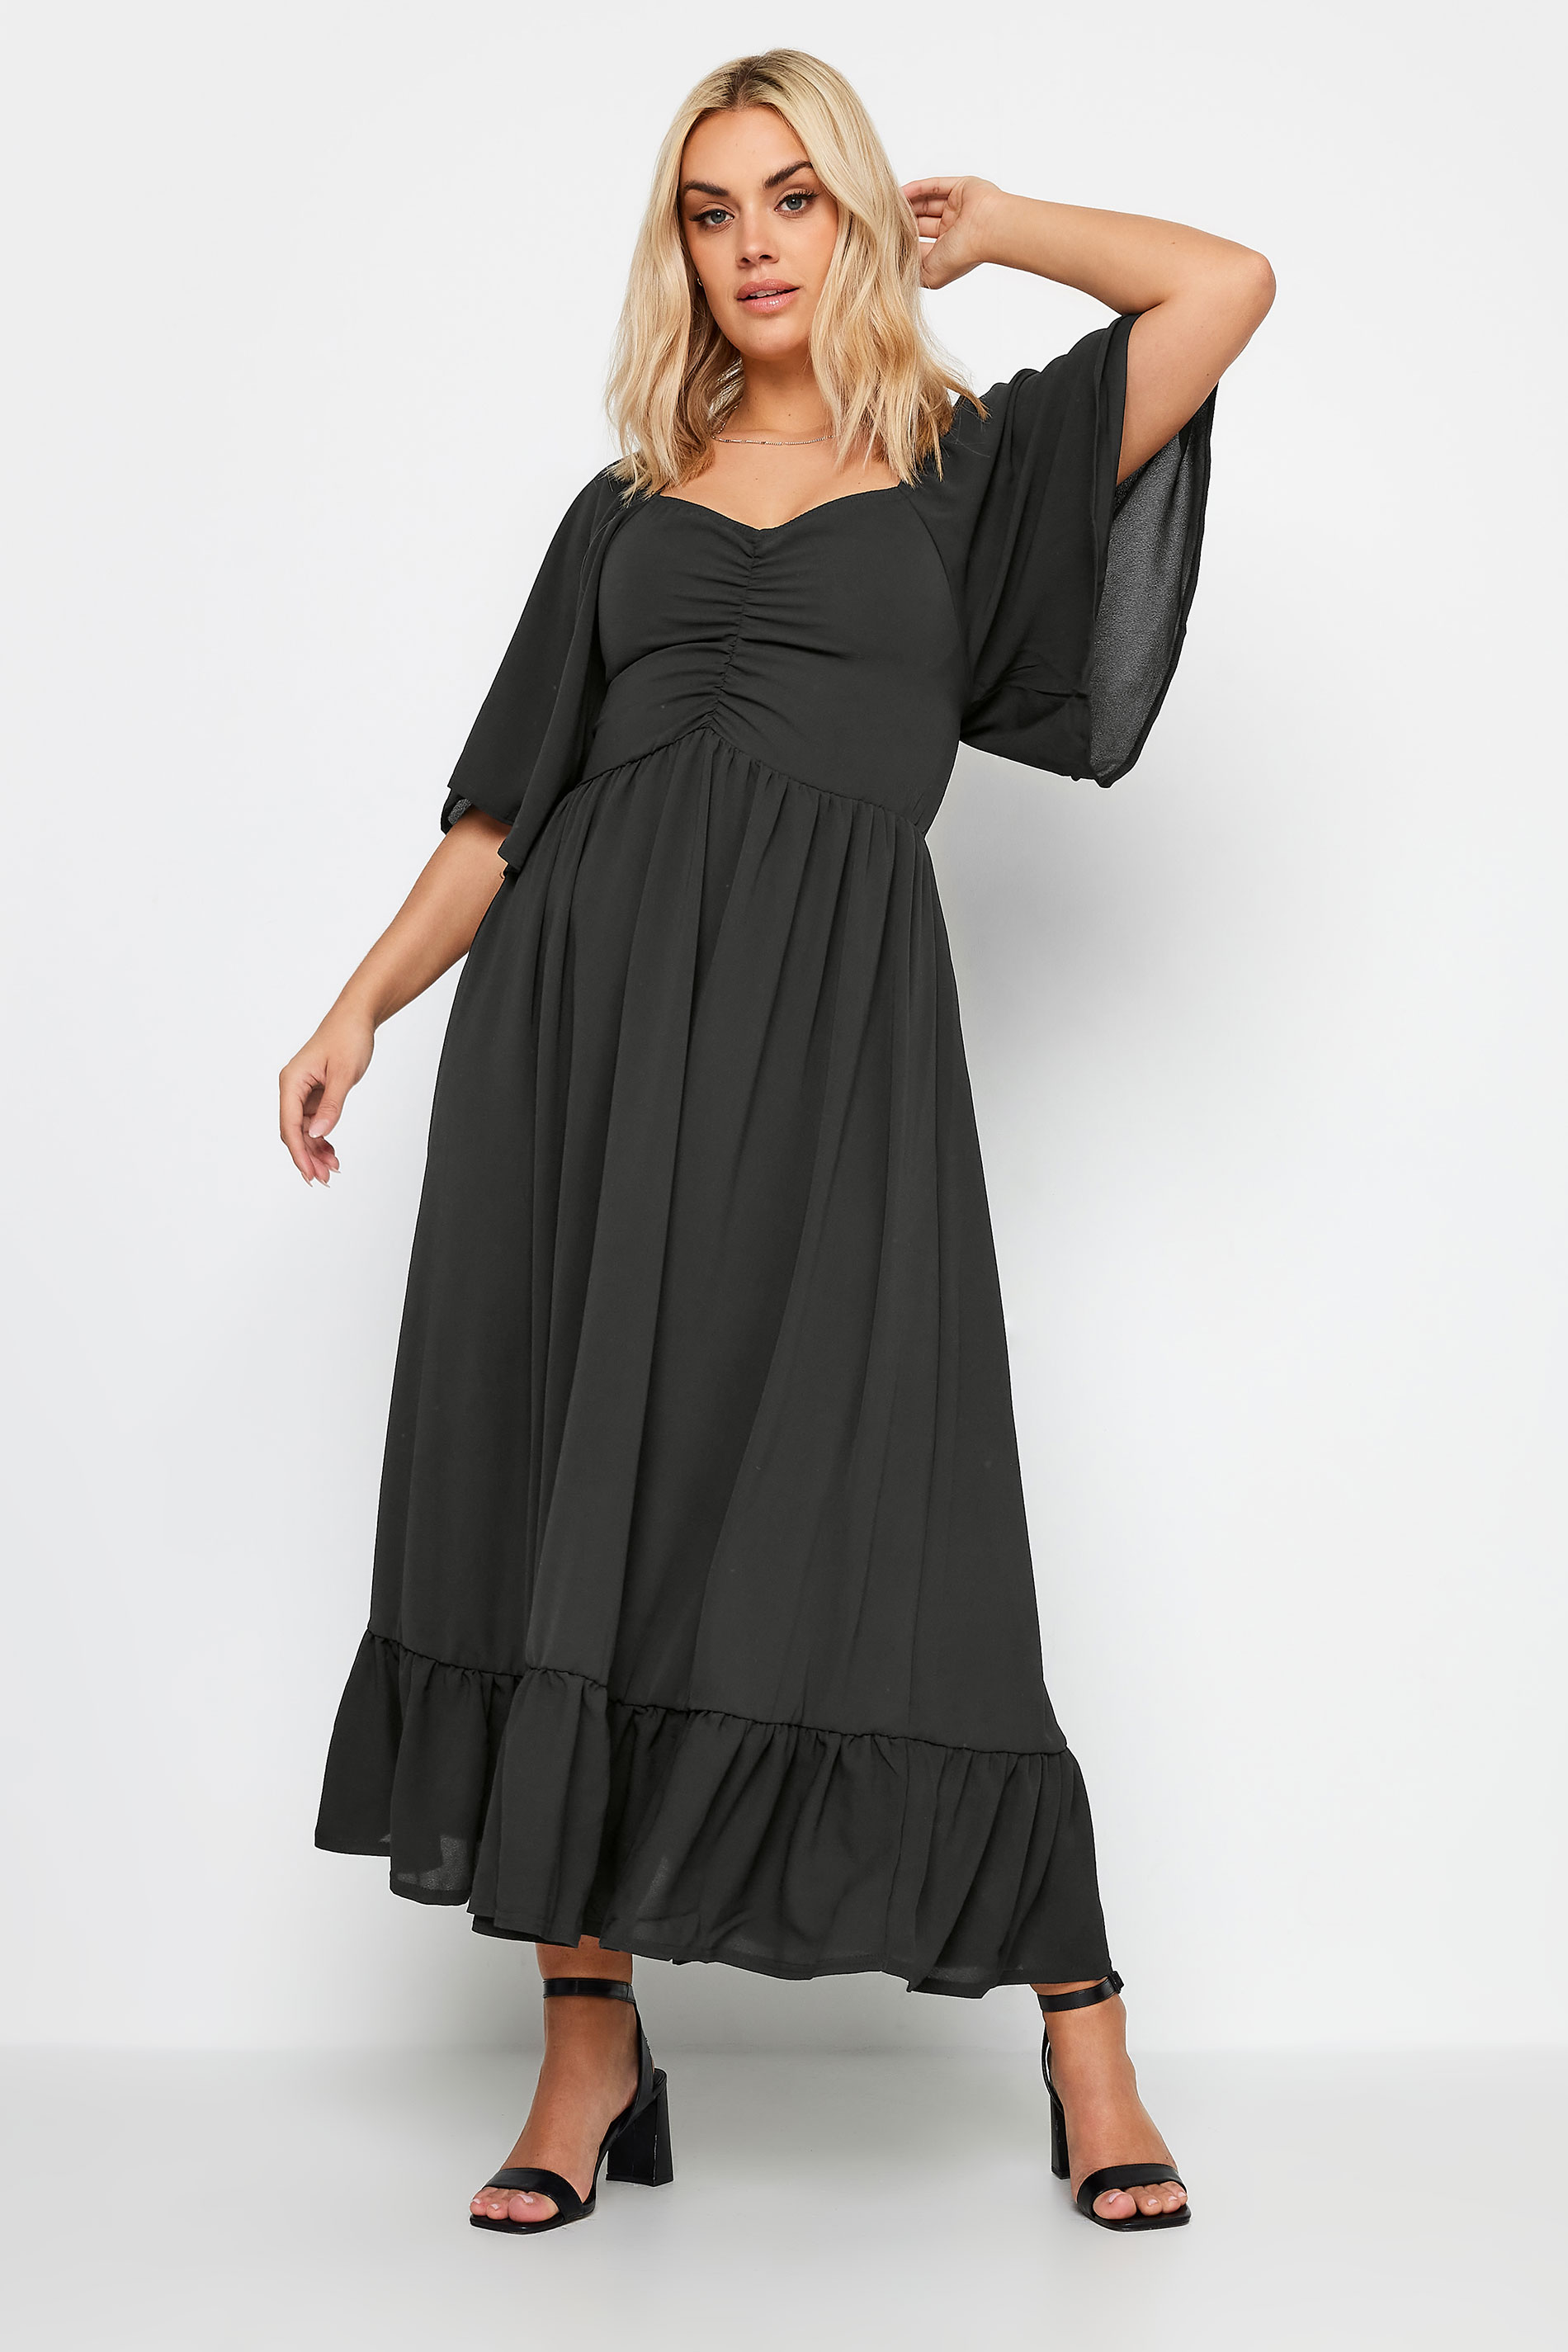 LIMITED COLLECTION Plus Size Black Ruched Angel Sleeve Dress | Yours Clothing 1